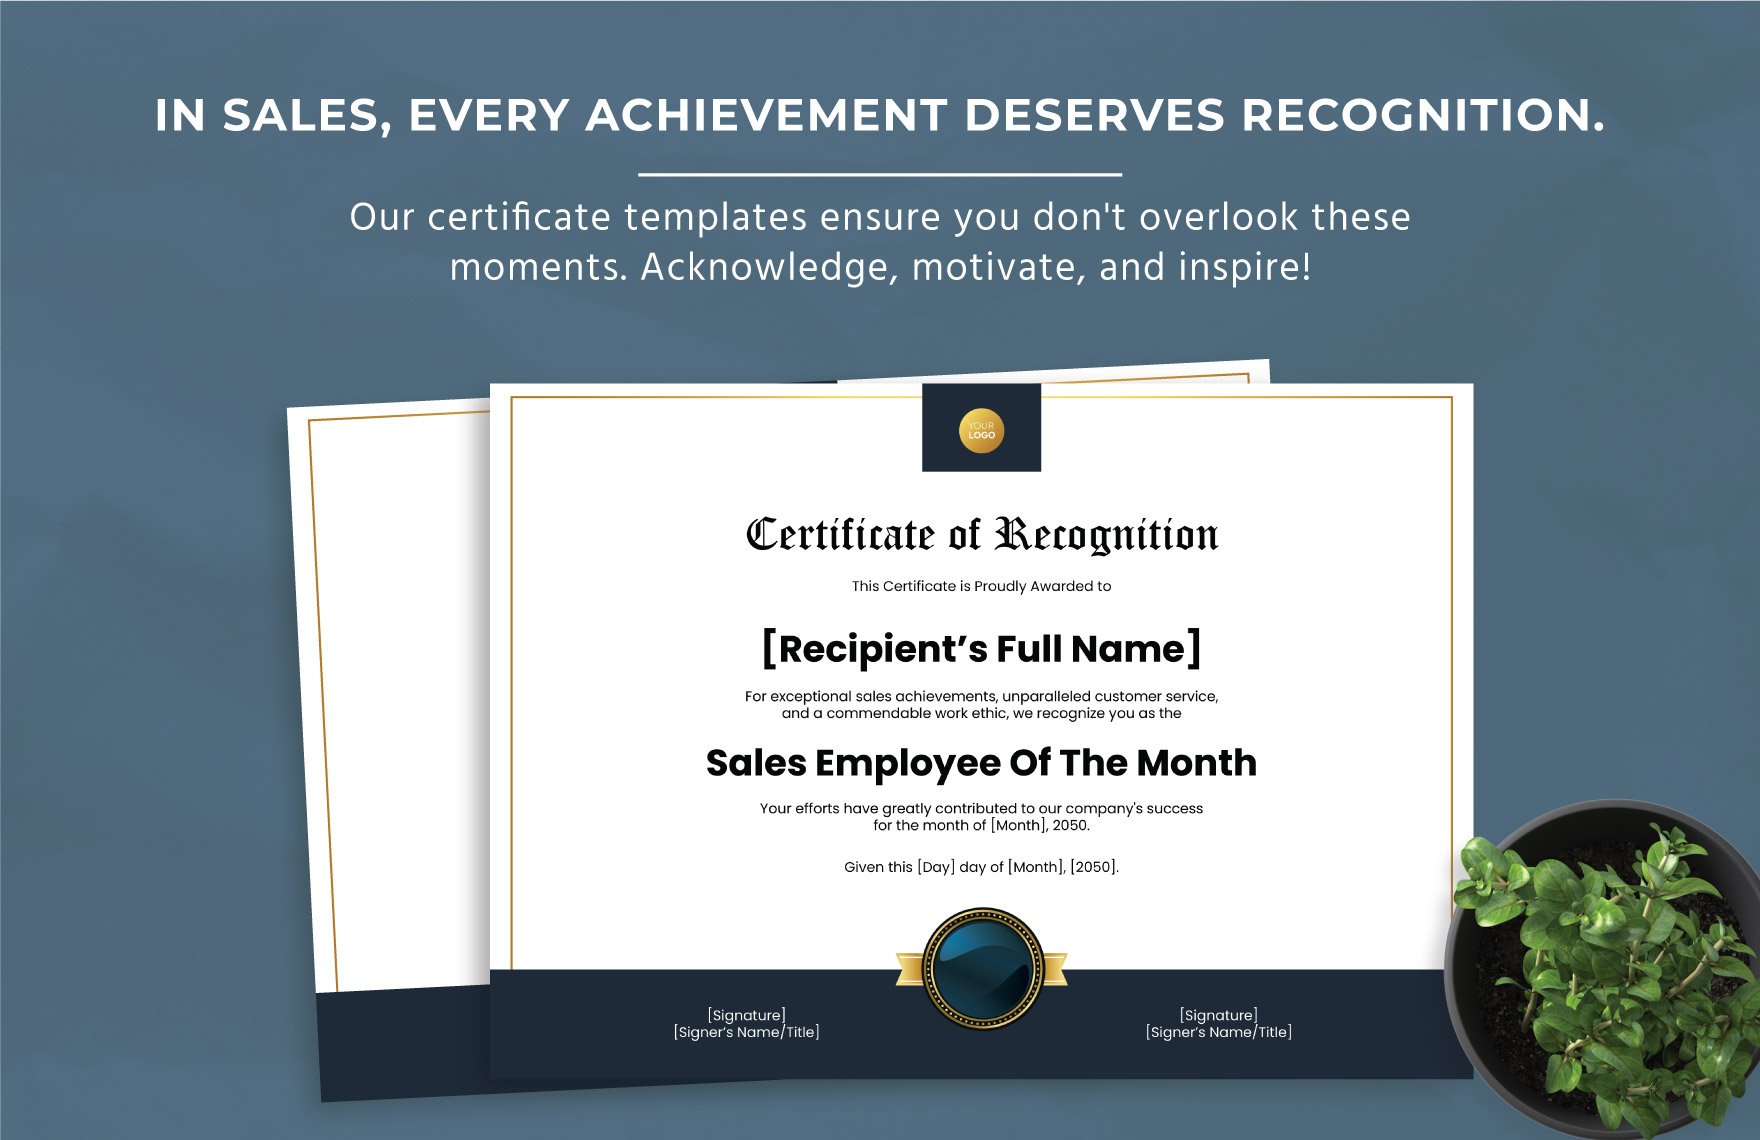 Sales Employee of the Month Certificate Template